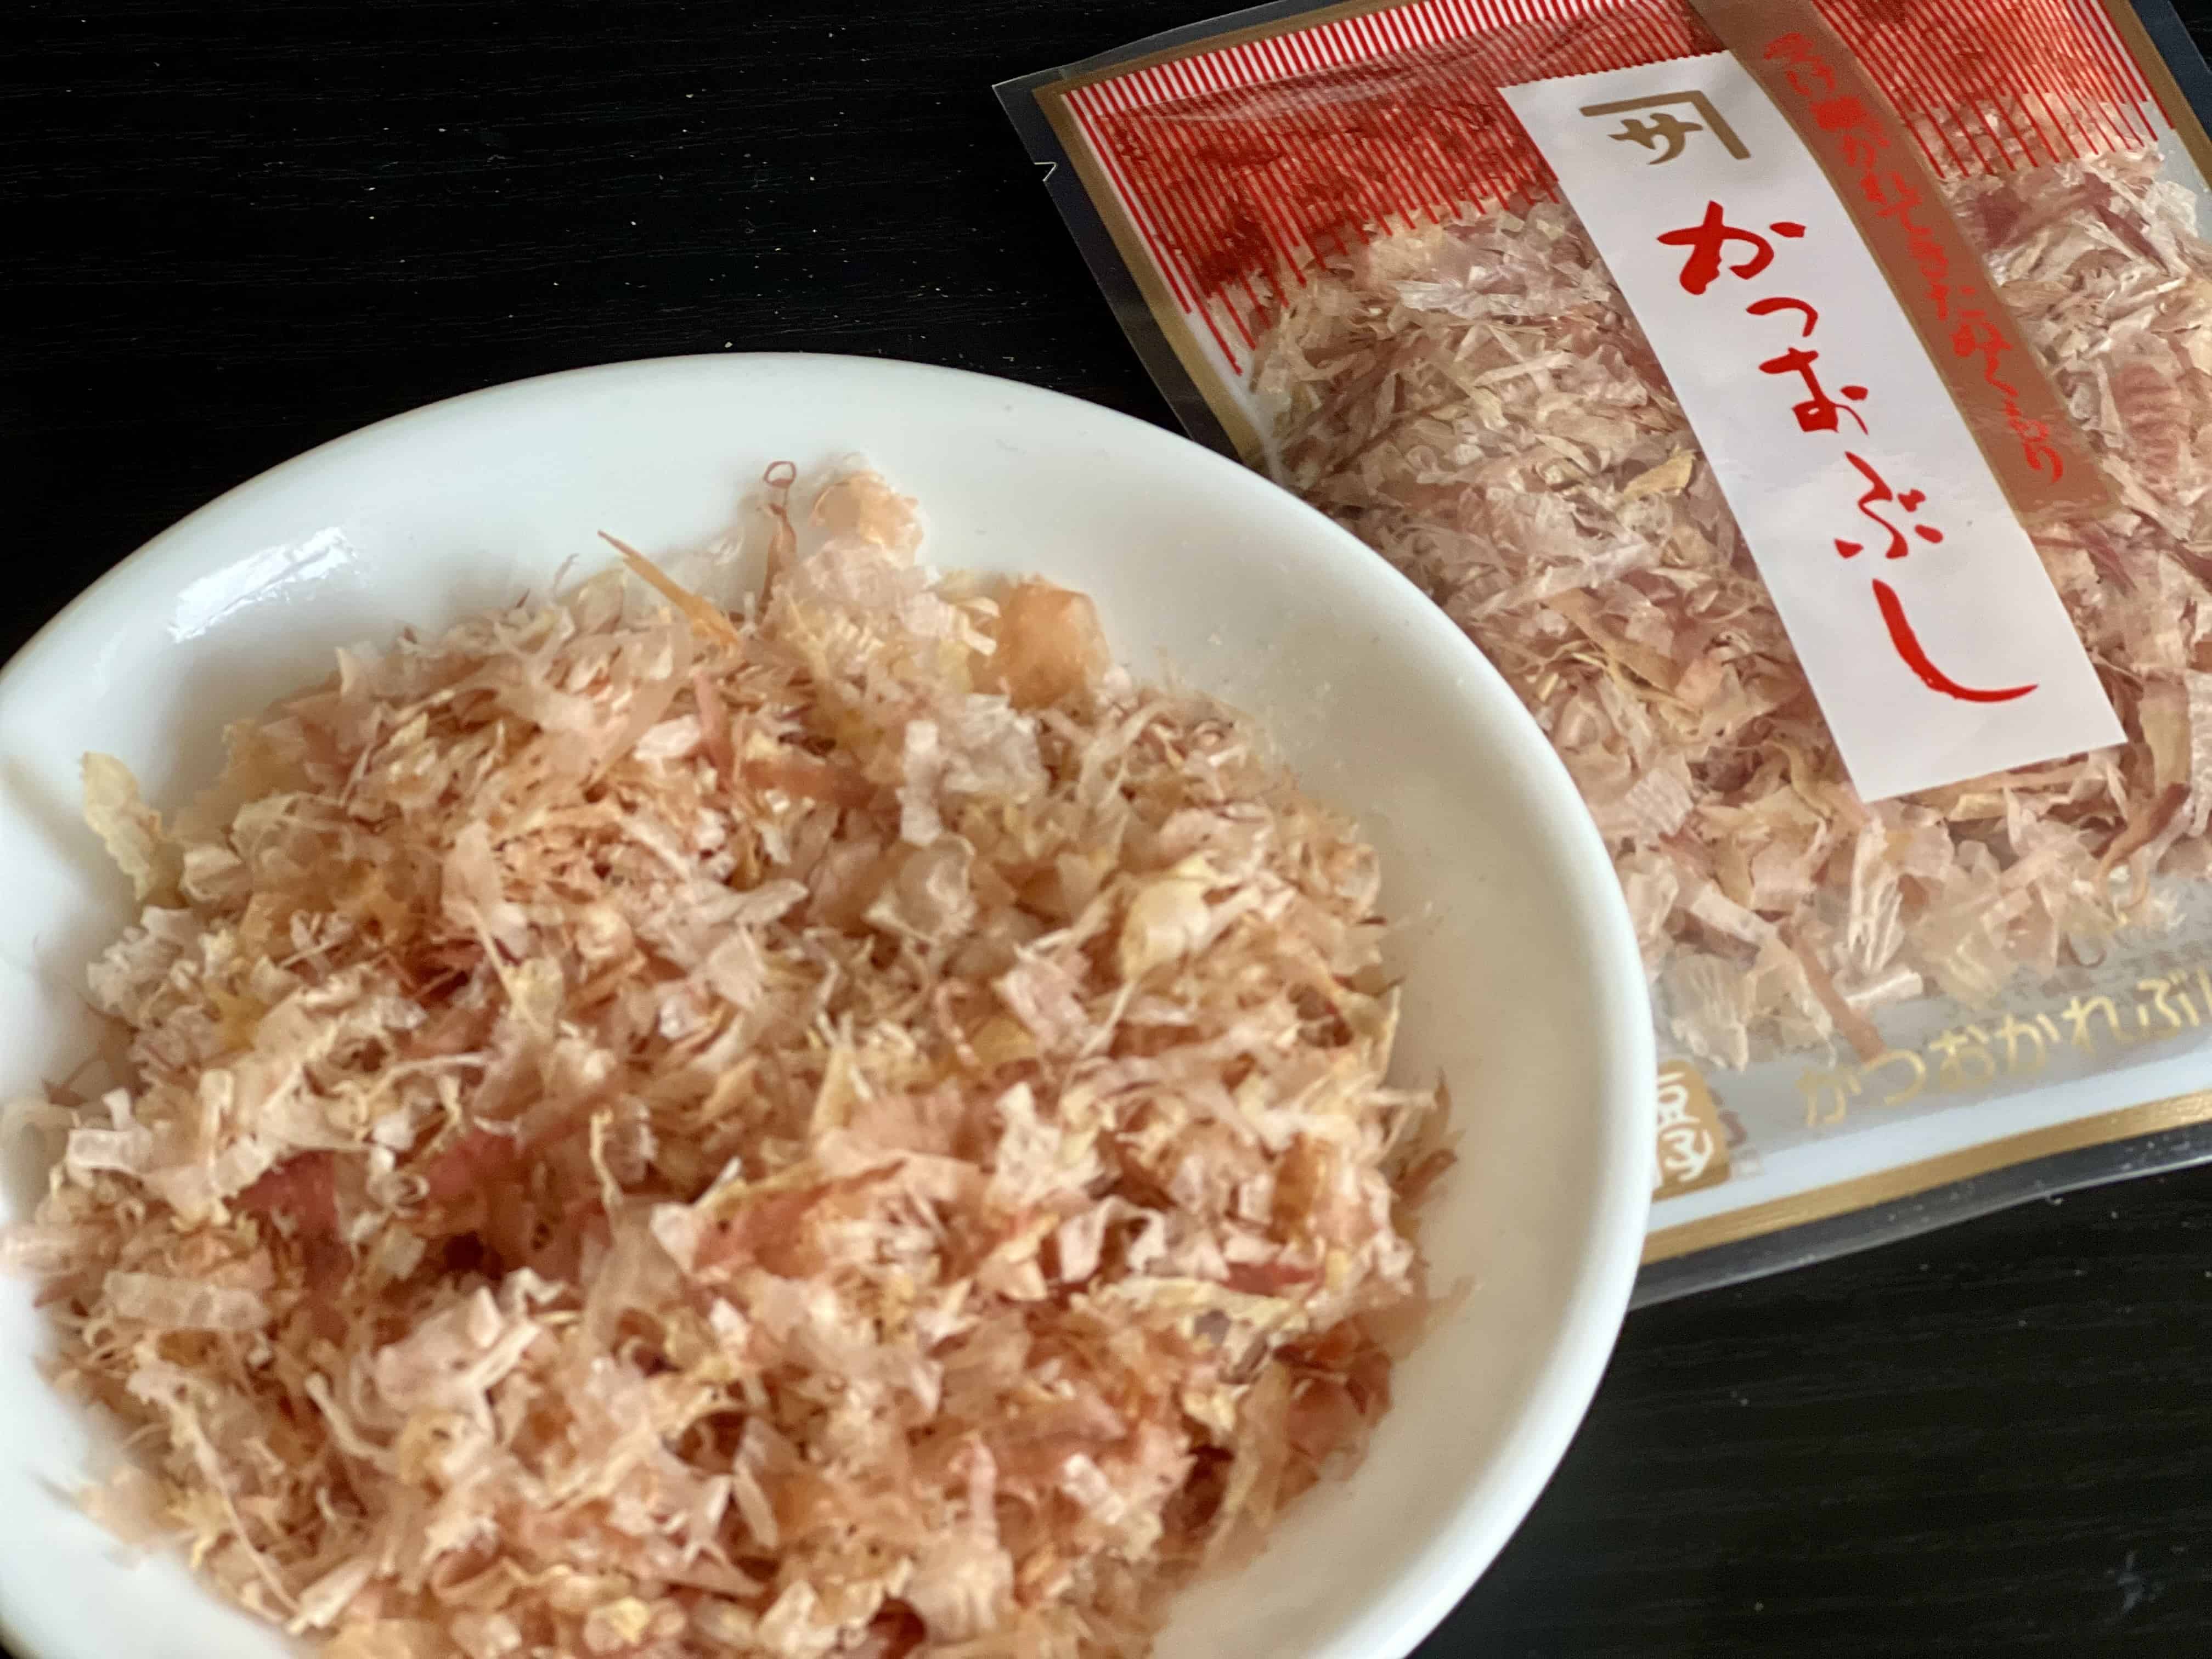 Dried bonito flakes on a plate.